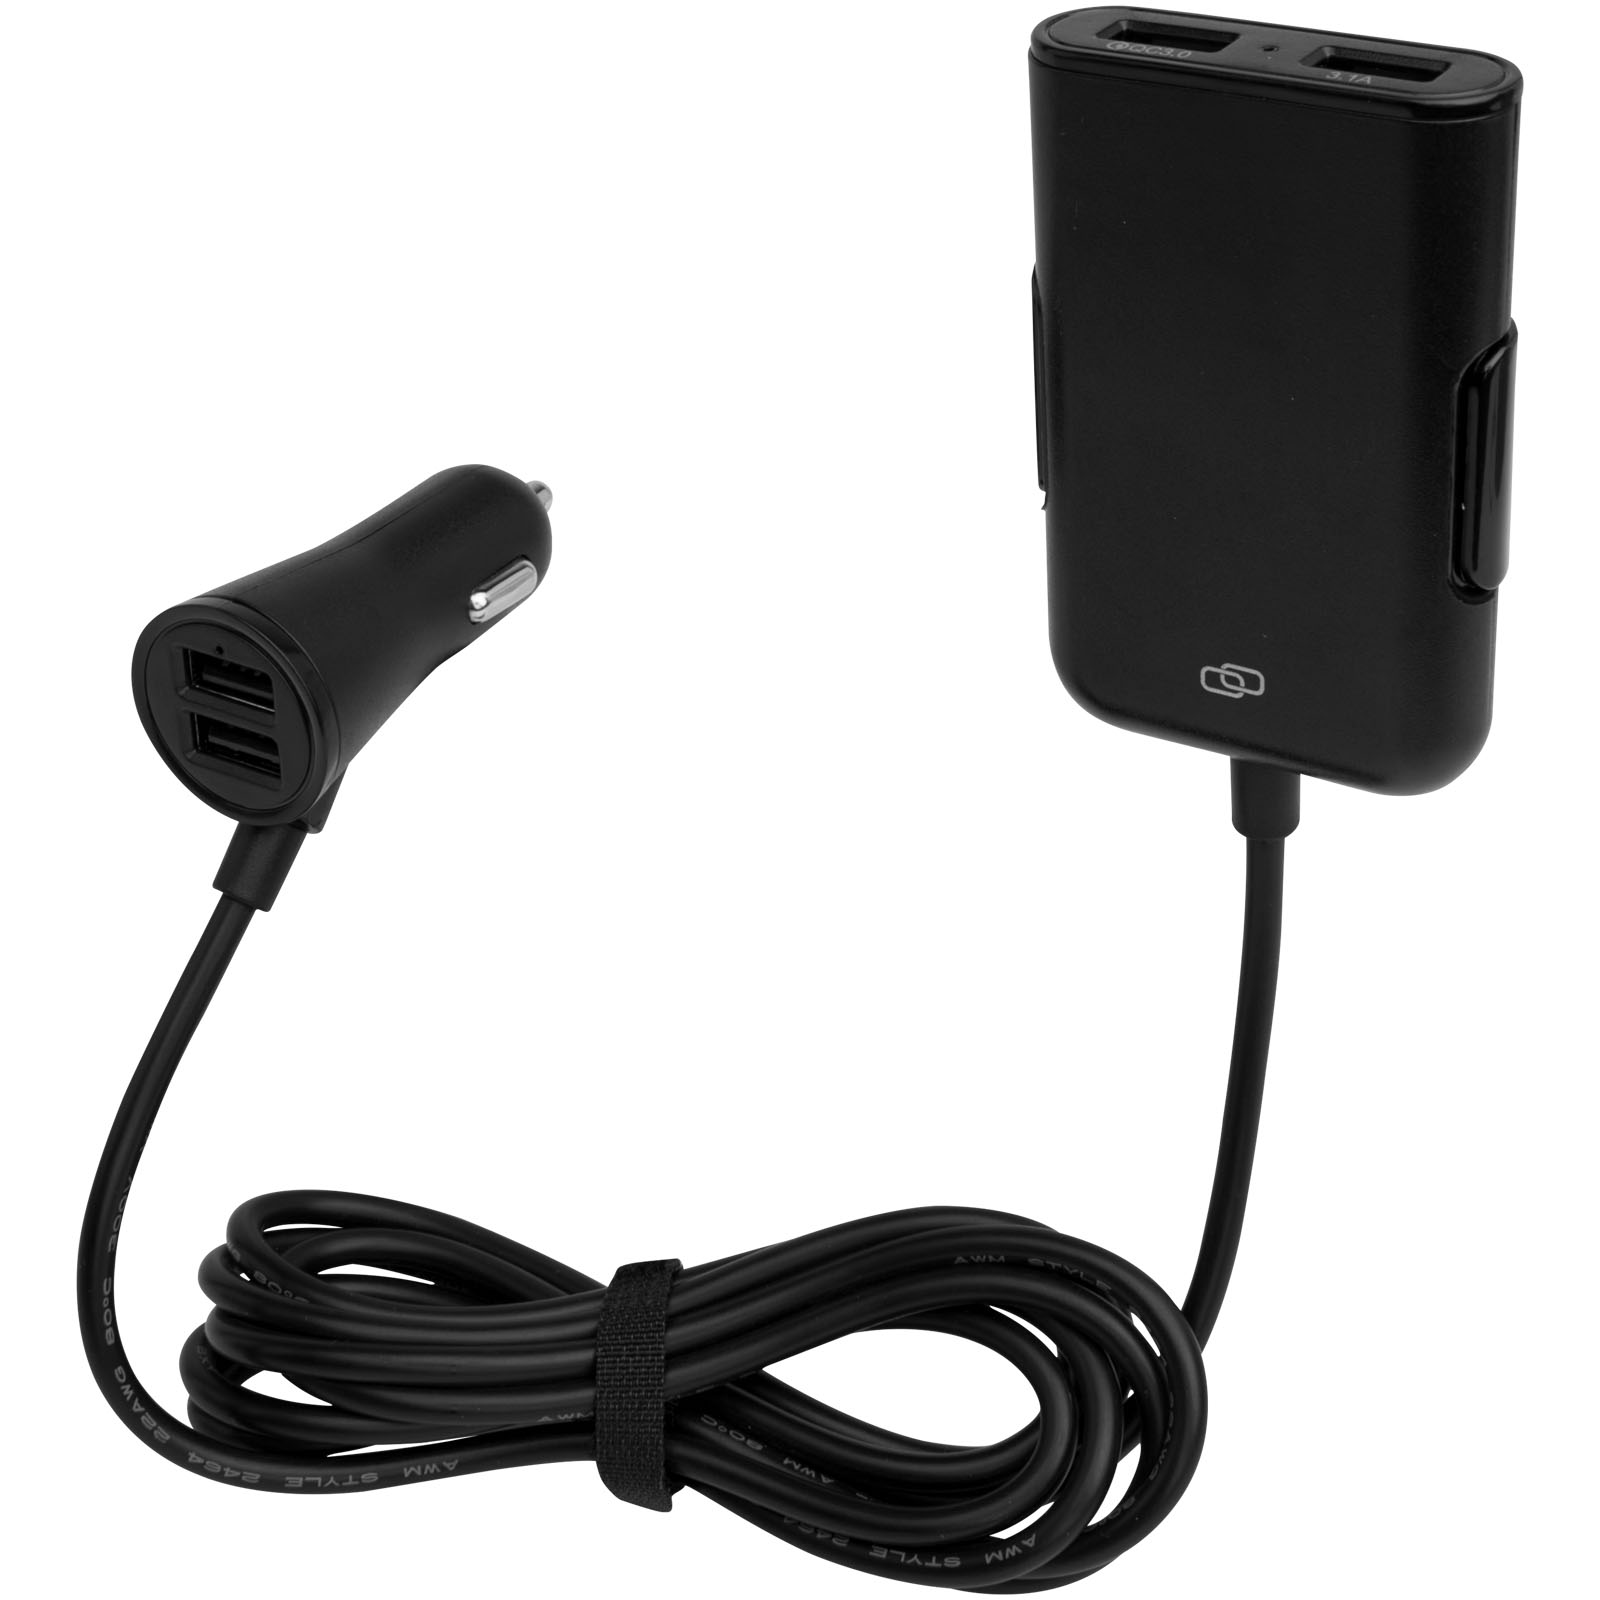 Advertising Chargers - Pilot dual car charger with QC 3.0 dual back seat extended charger